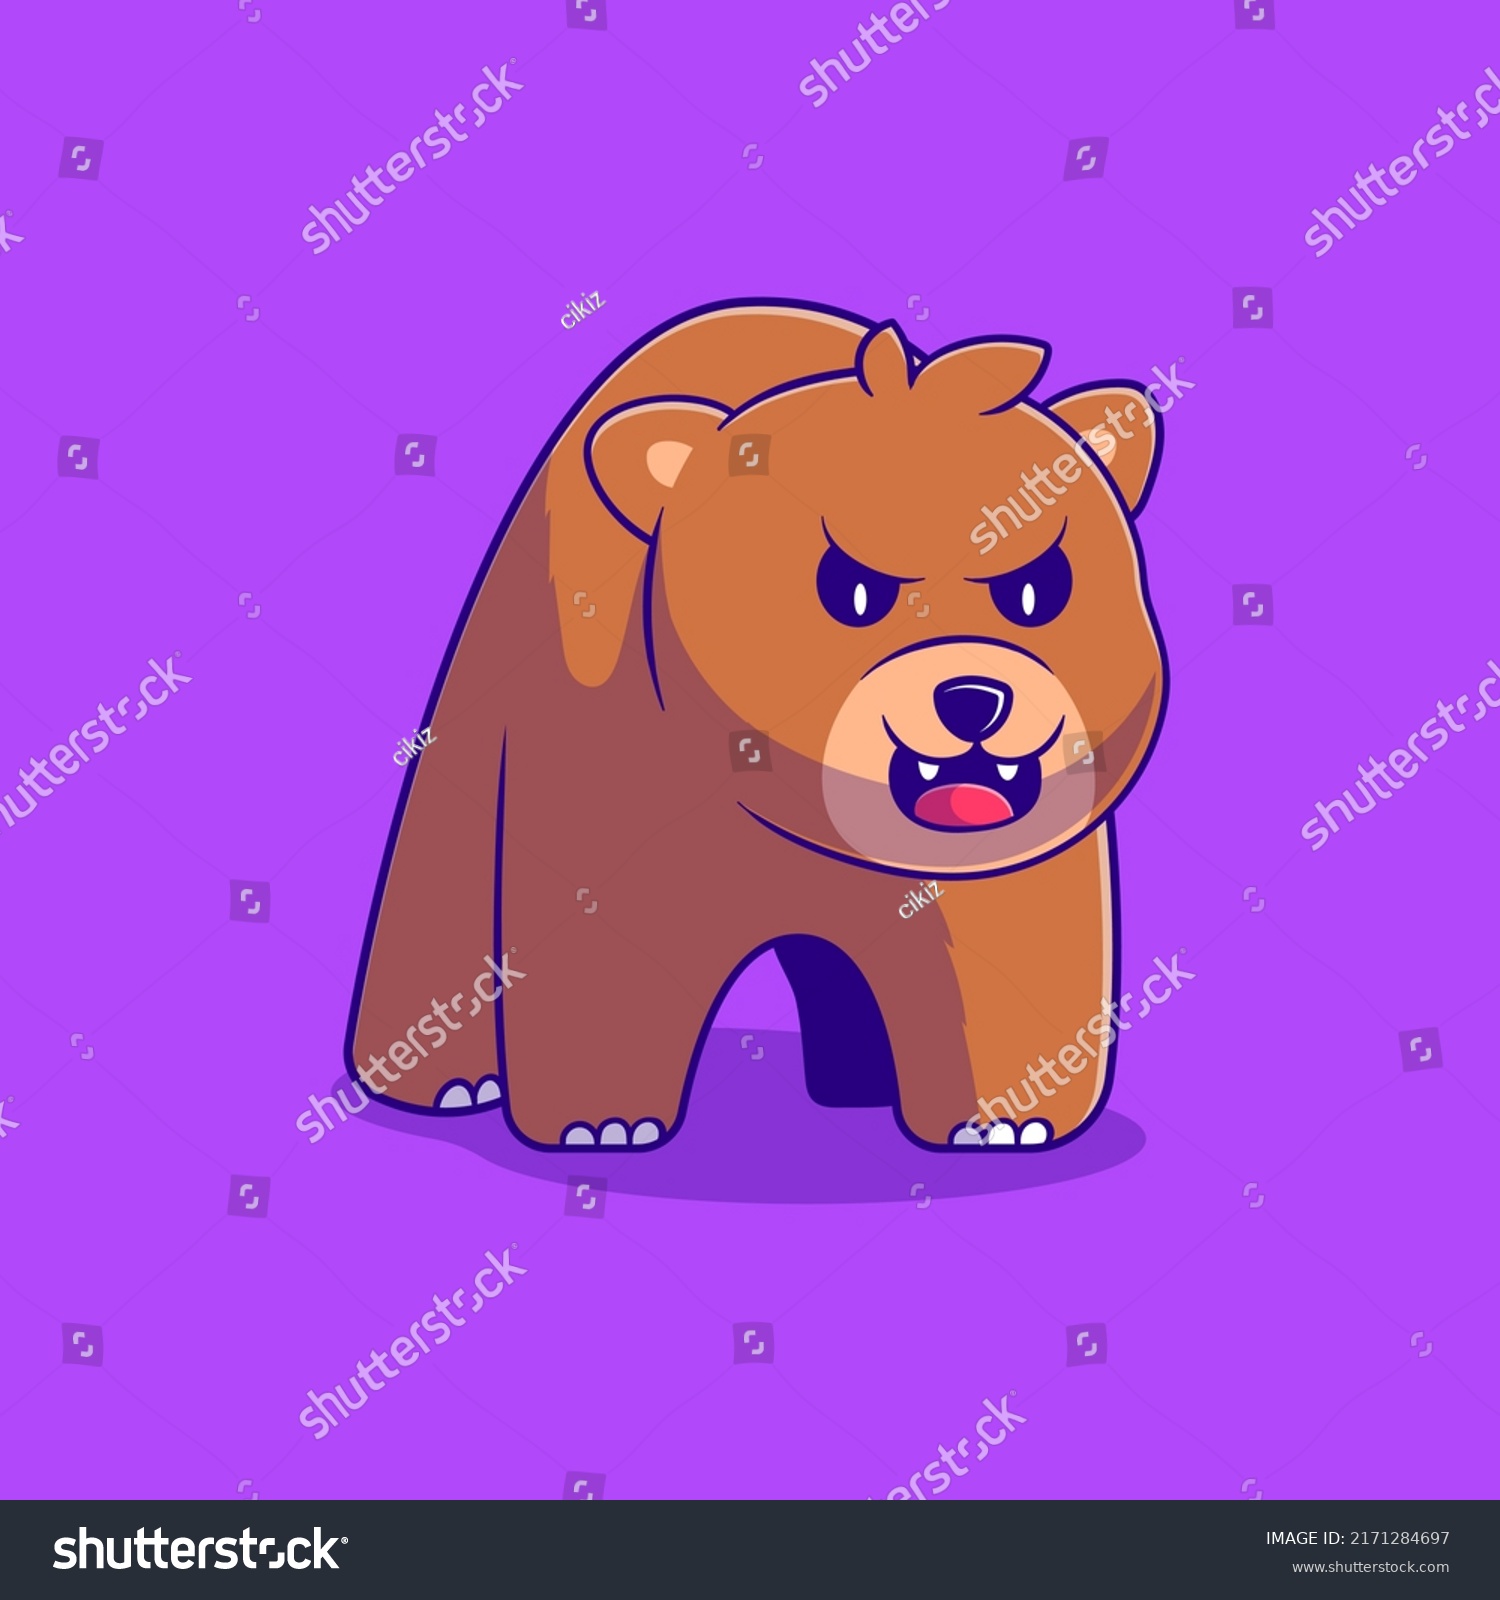 Cute Angry Grizzly Bear Illustration Suitable Stock Vector Royalty Free 2171284697 Shutterstock 4999